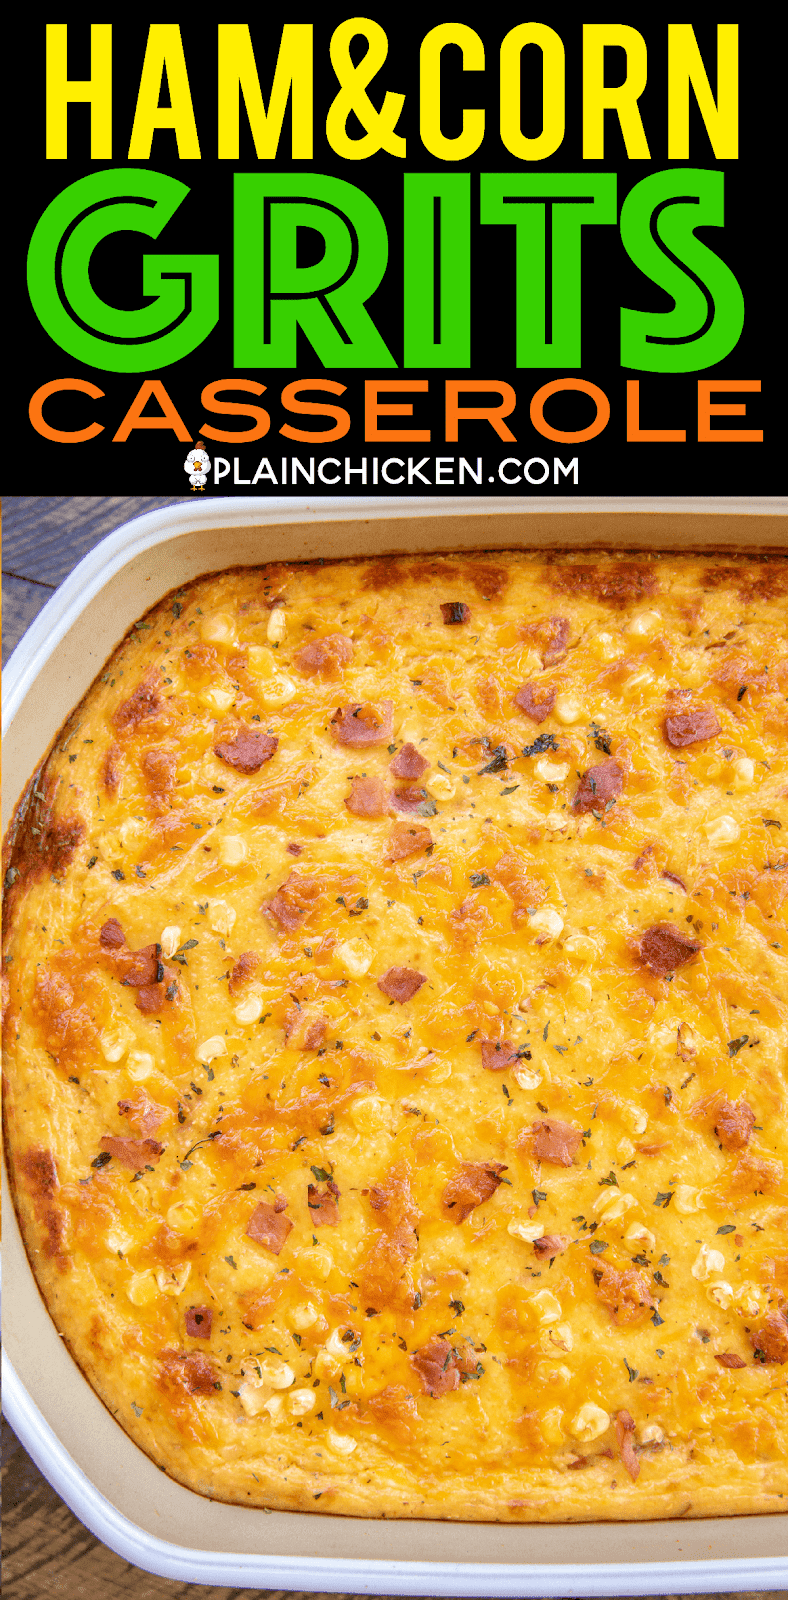 Ham and Corn Grits Casserole - seriously delicious! Great for breakfast, lunch or dinner!! Stone ground grits, chicken broth, ham, corn, cheddar cheese, milk, eggs, pepper and garlic. Can make ahead and refrigerate or freeze for later. Took this to a potluck and everyone asked for the recipe. DELICIOUS!!! #casserole #freezermeal #ham #breakfast #grits